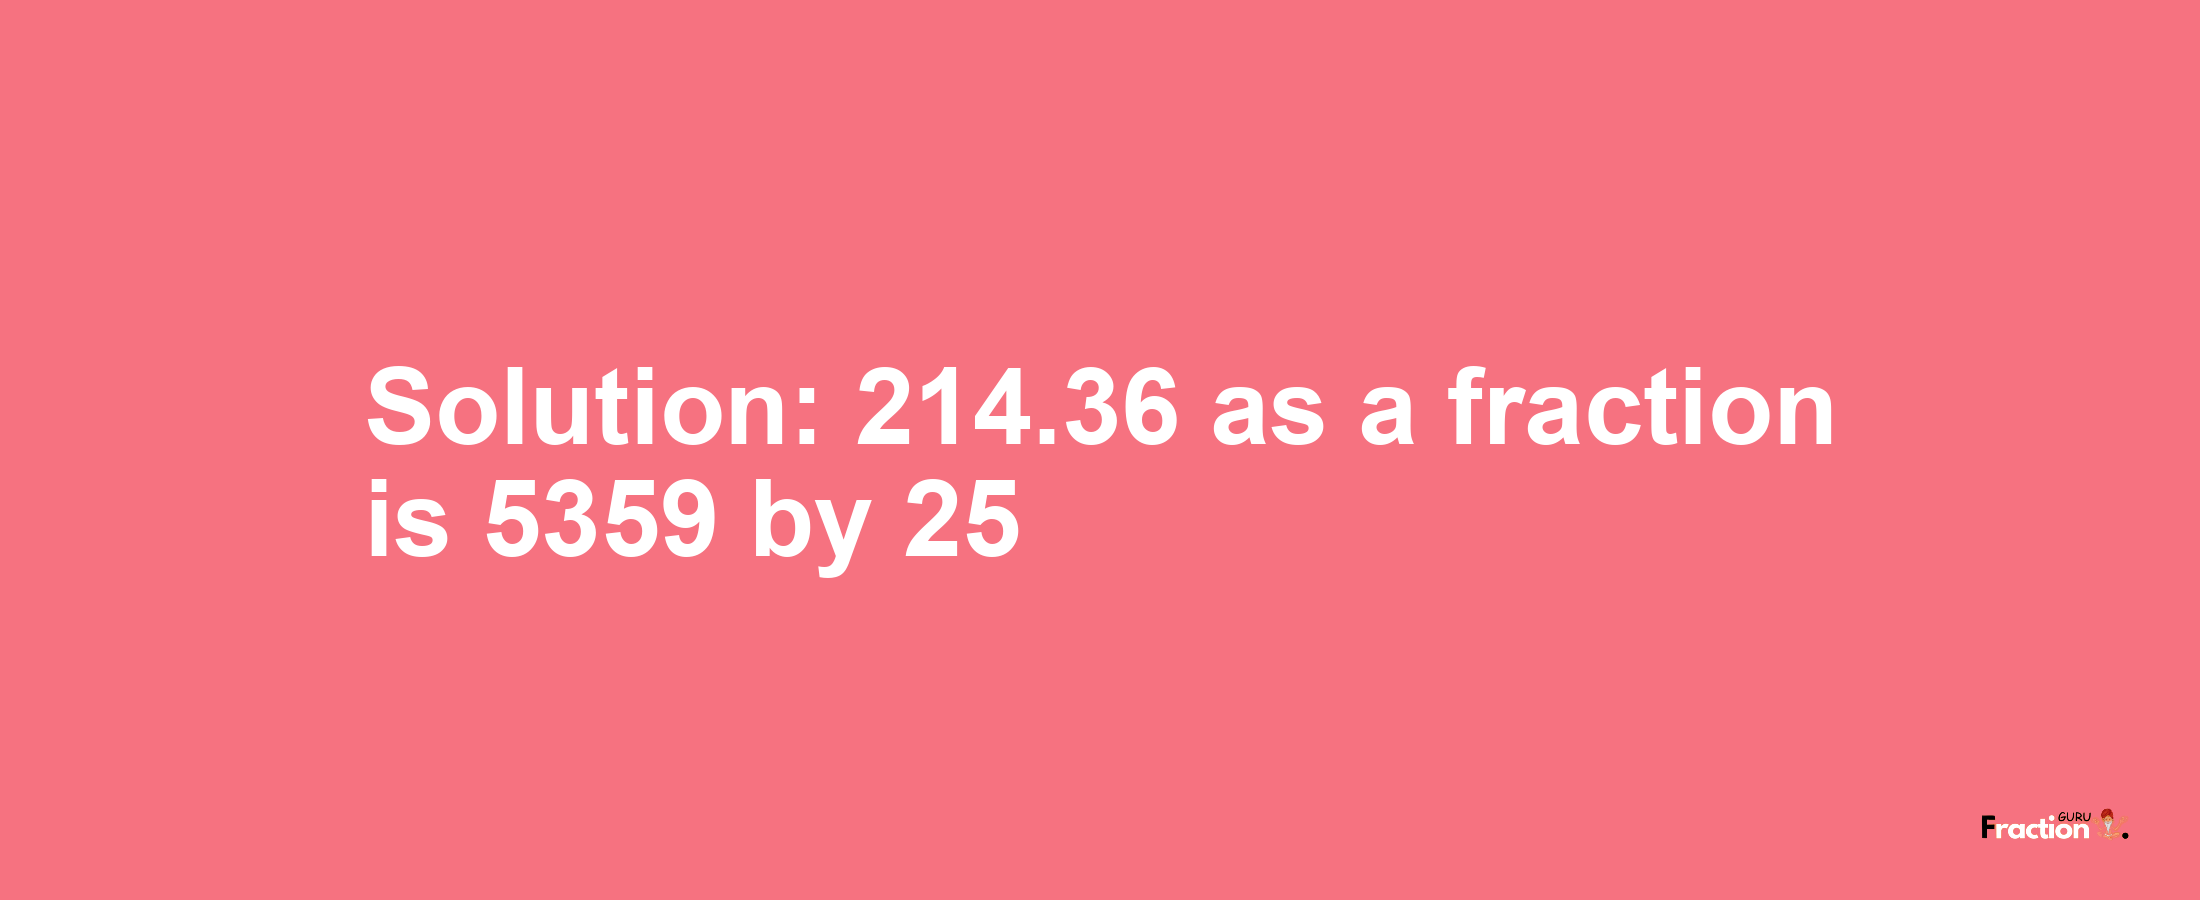 Solution:214.36 as a fraction is 5359/25